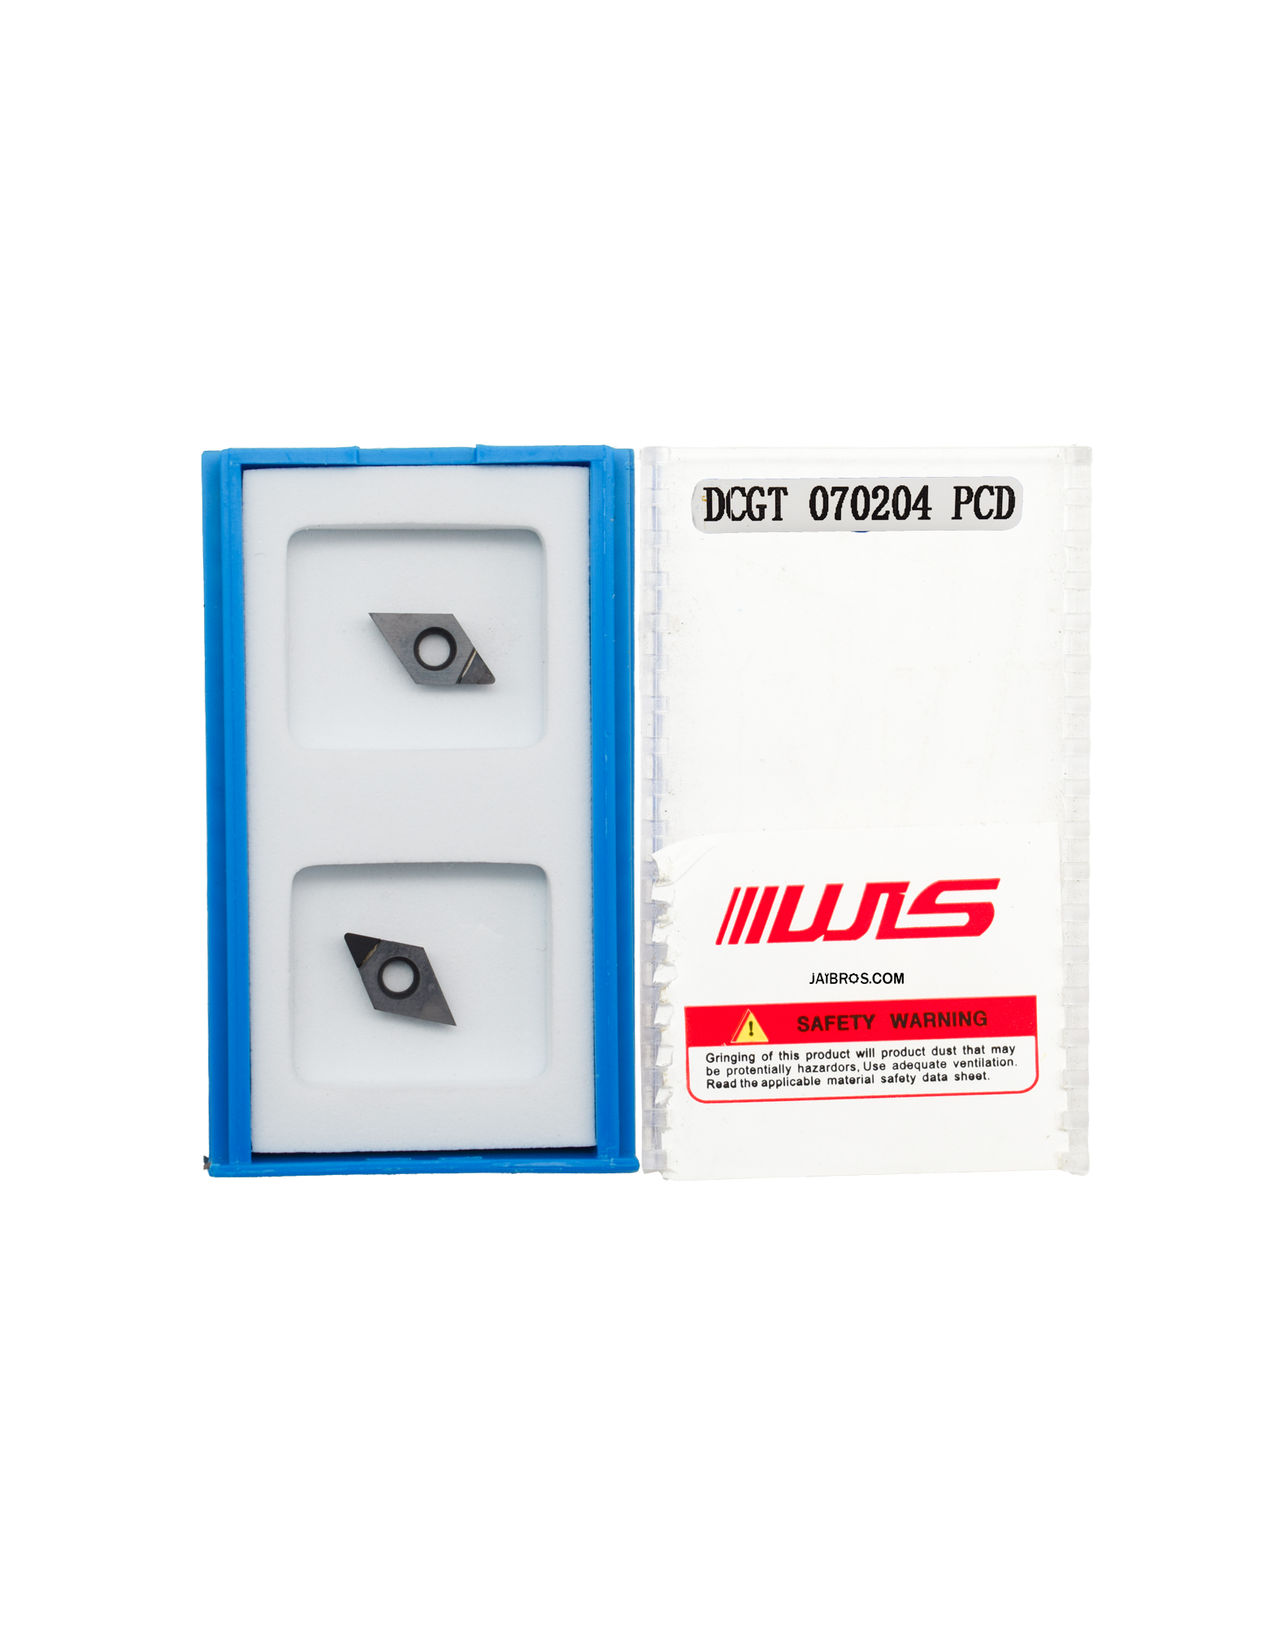 WS DCGT070204 pcd insert Pack of 2